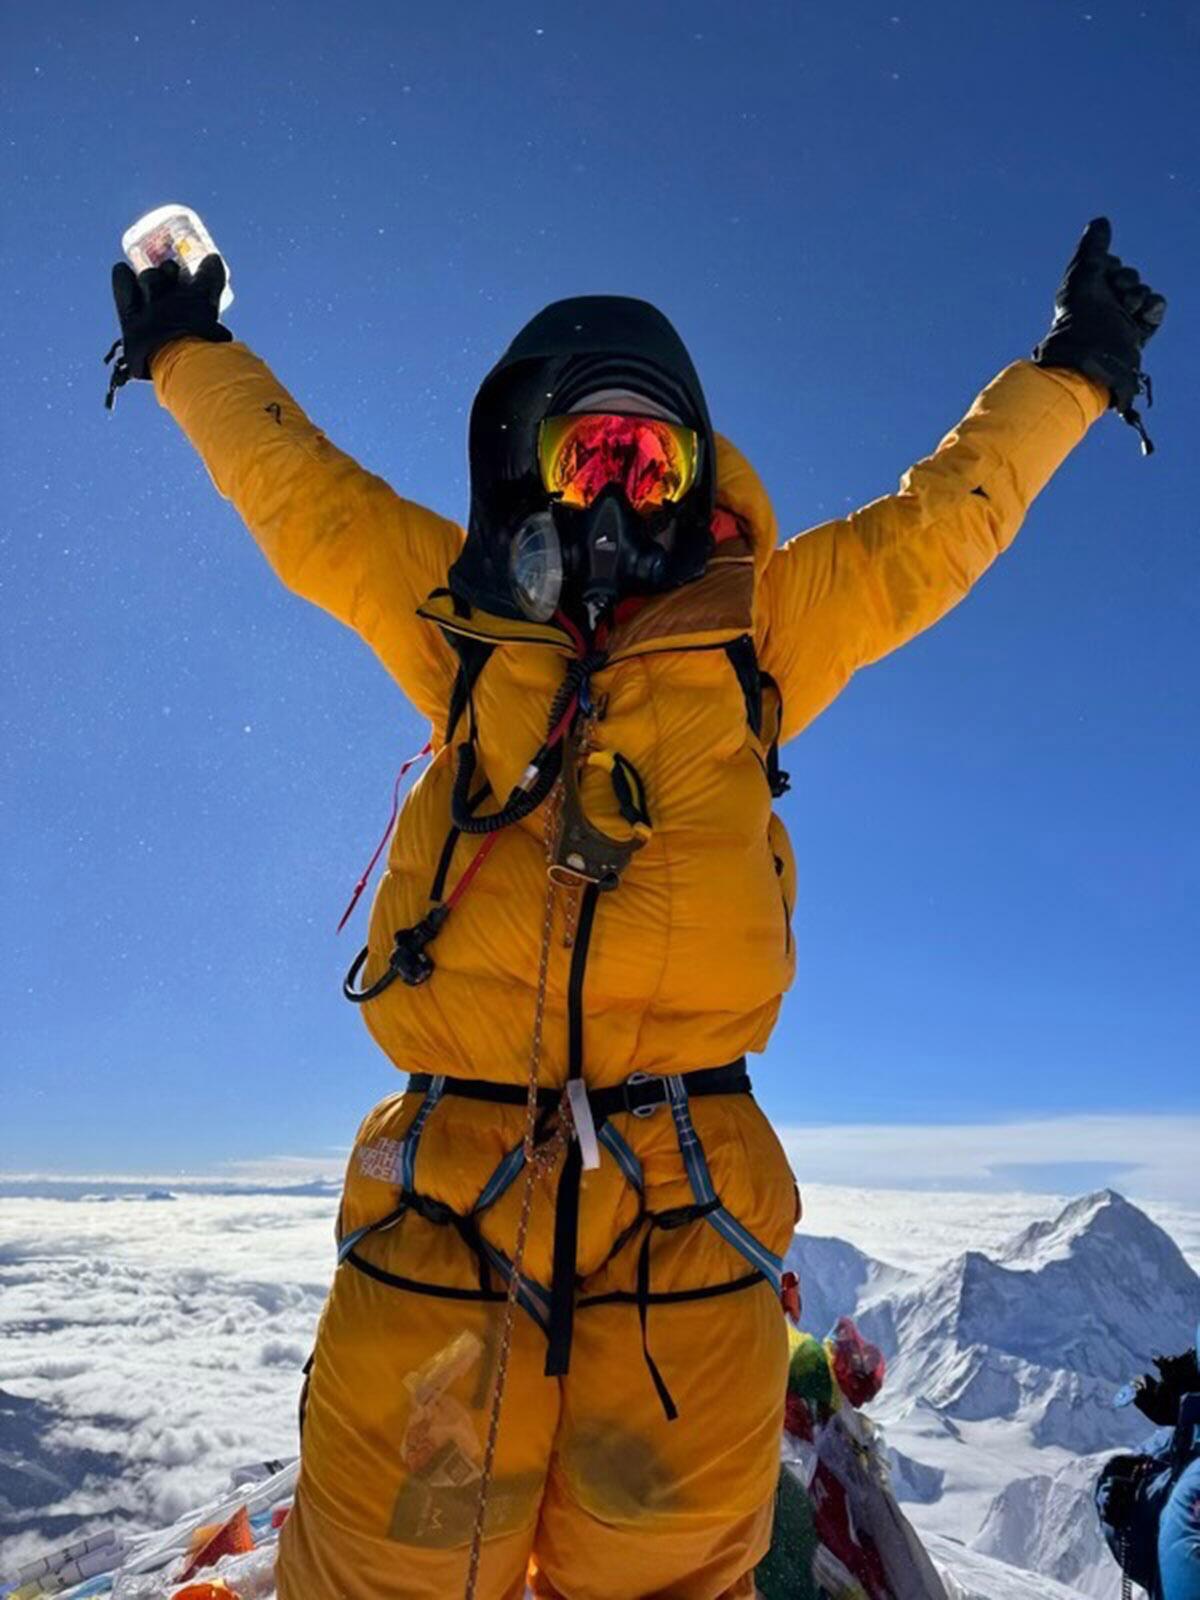 A man in yellow snowsuit stands with arms raised on the summit of Mt. Everest.